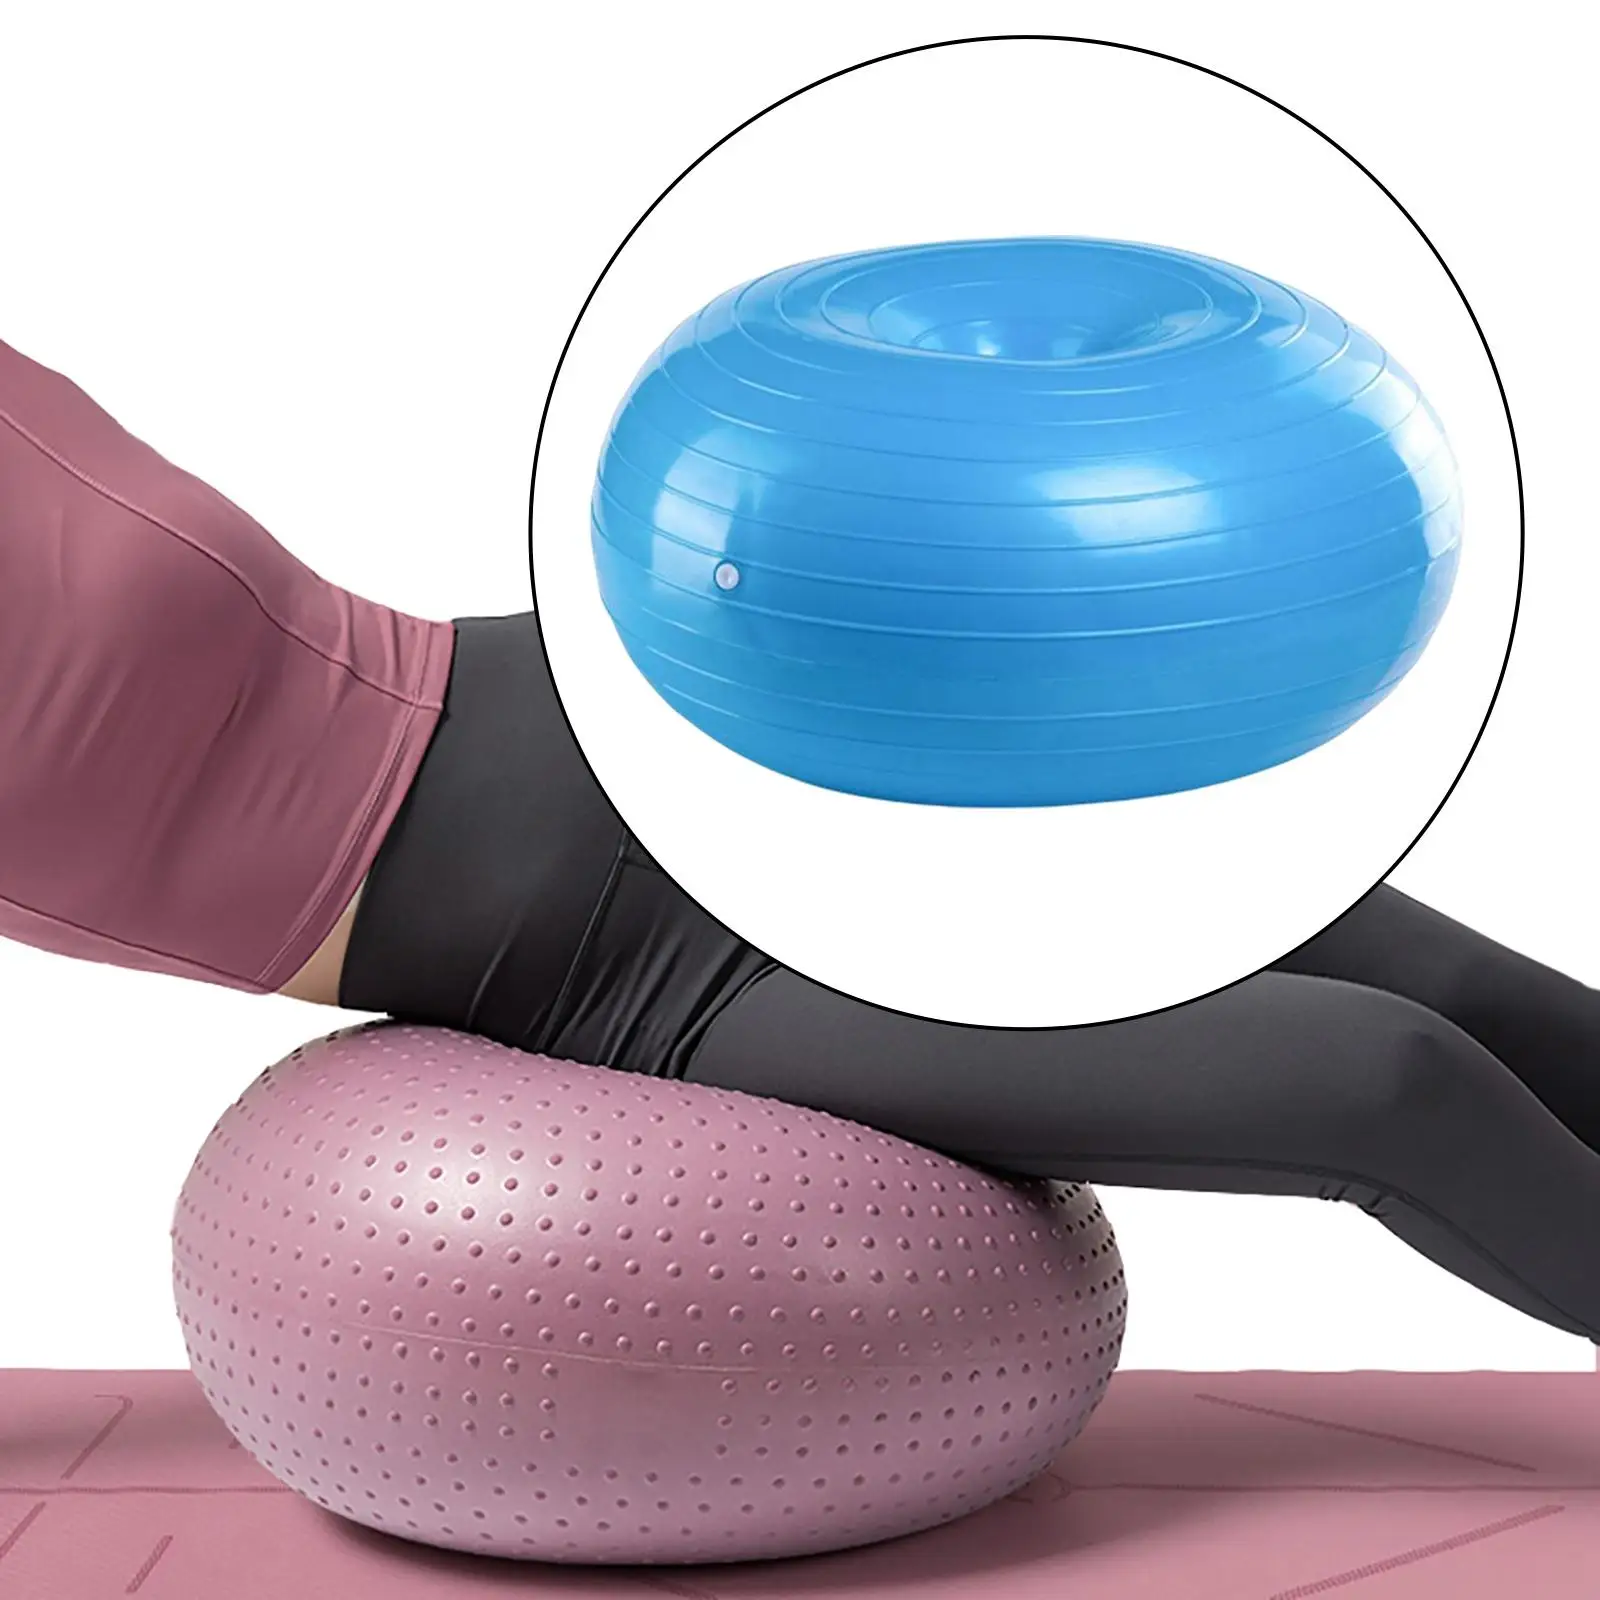 1x Pilates Donut Balance Inflatable Stability Strength Exercise Aid Thickening Fitness Ball Yoga Ball for Office Classroom Home